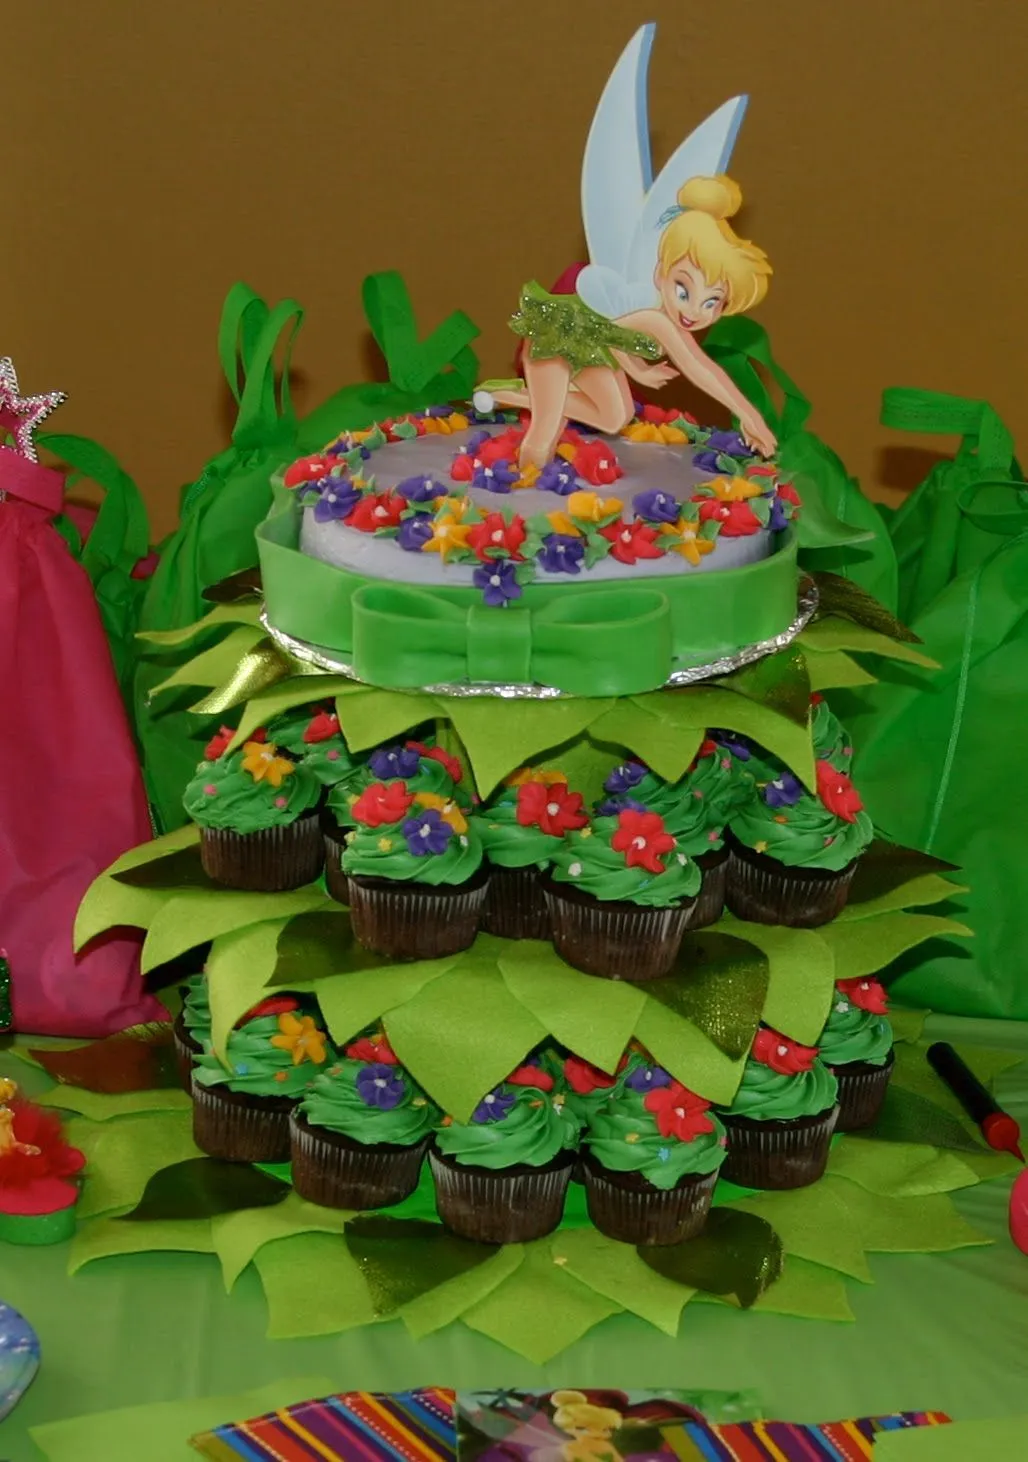 Events & Crafts.: Tinkerbell Cake